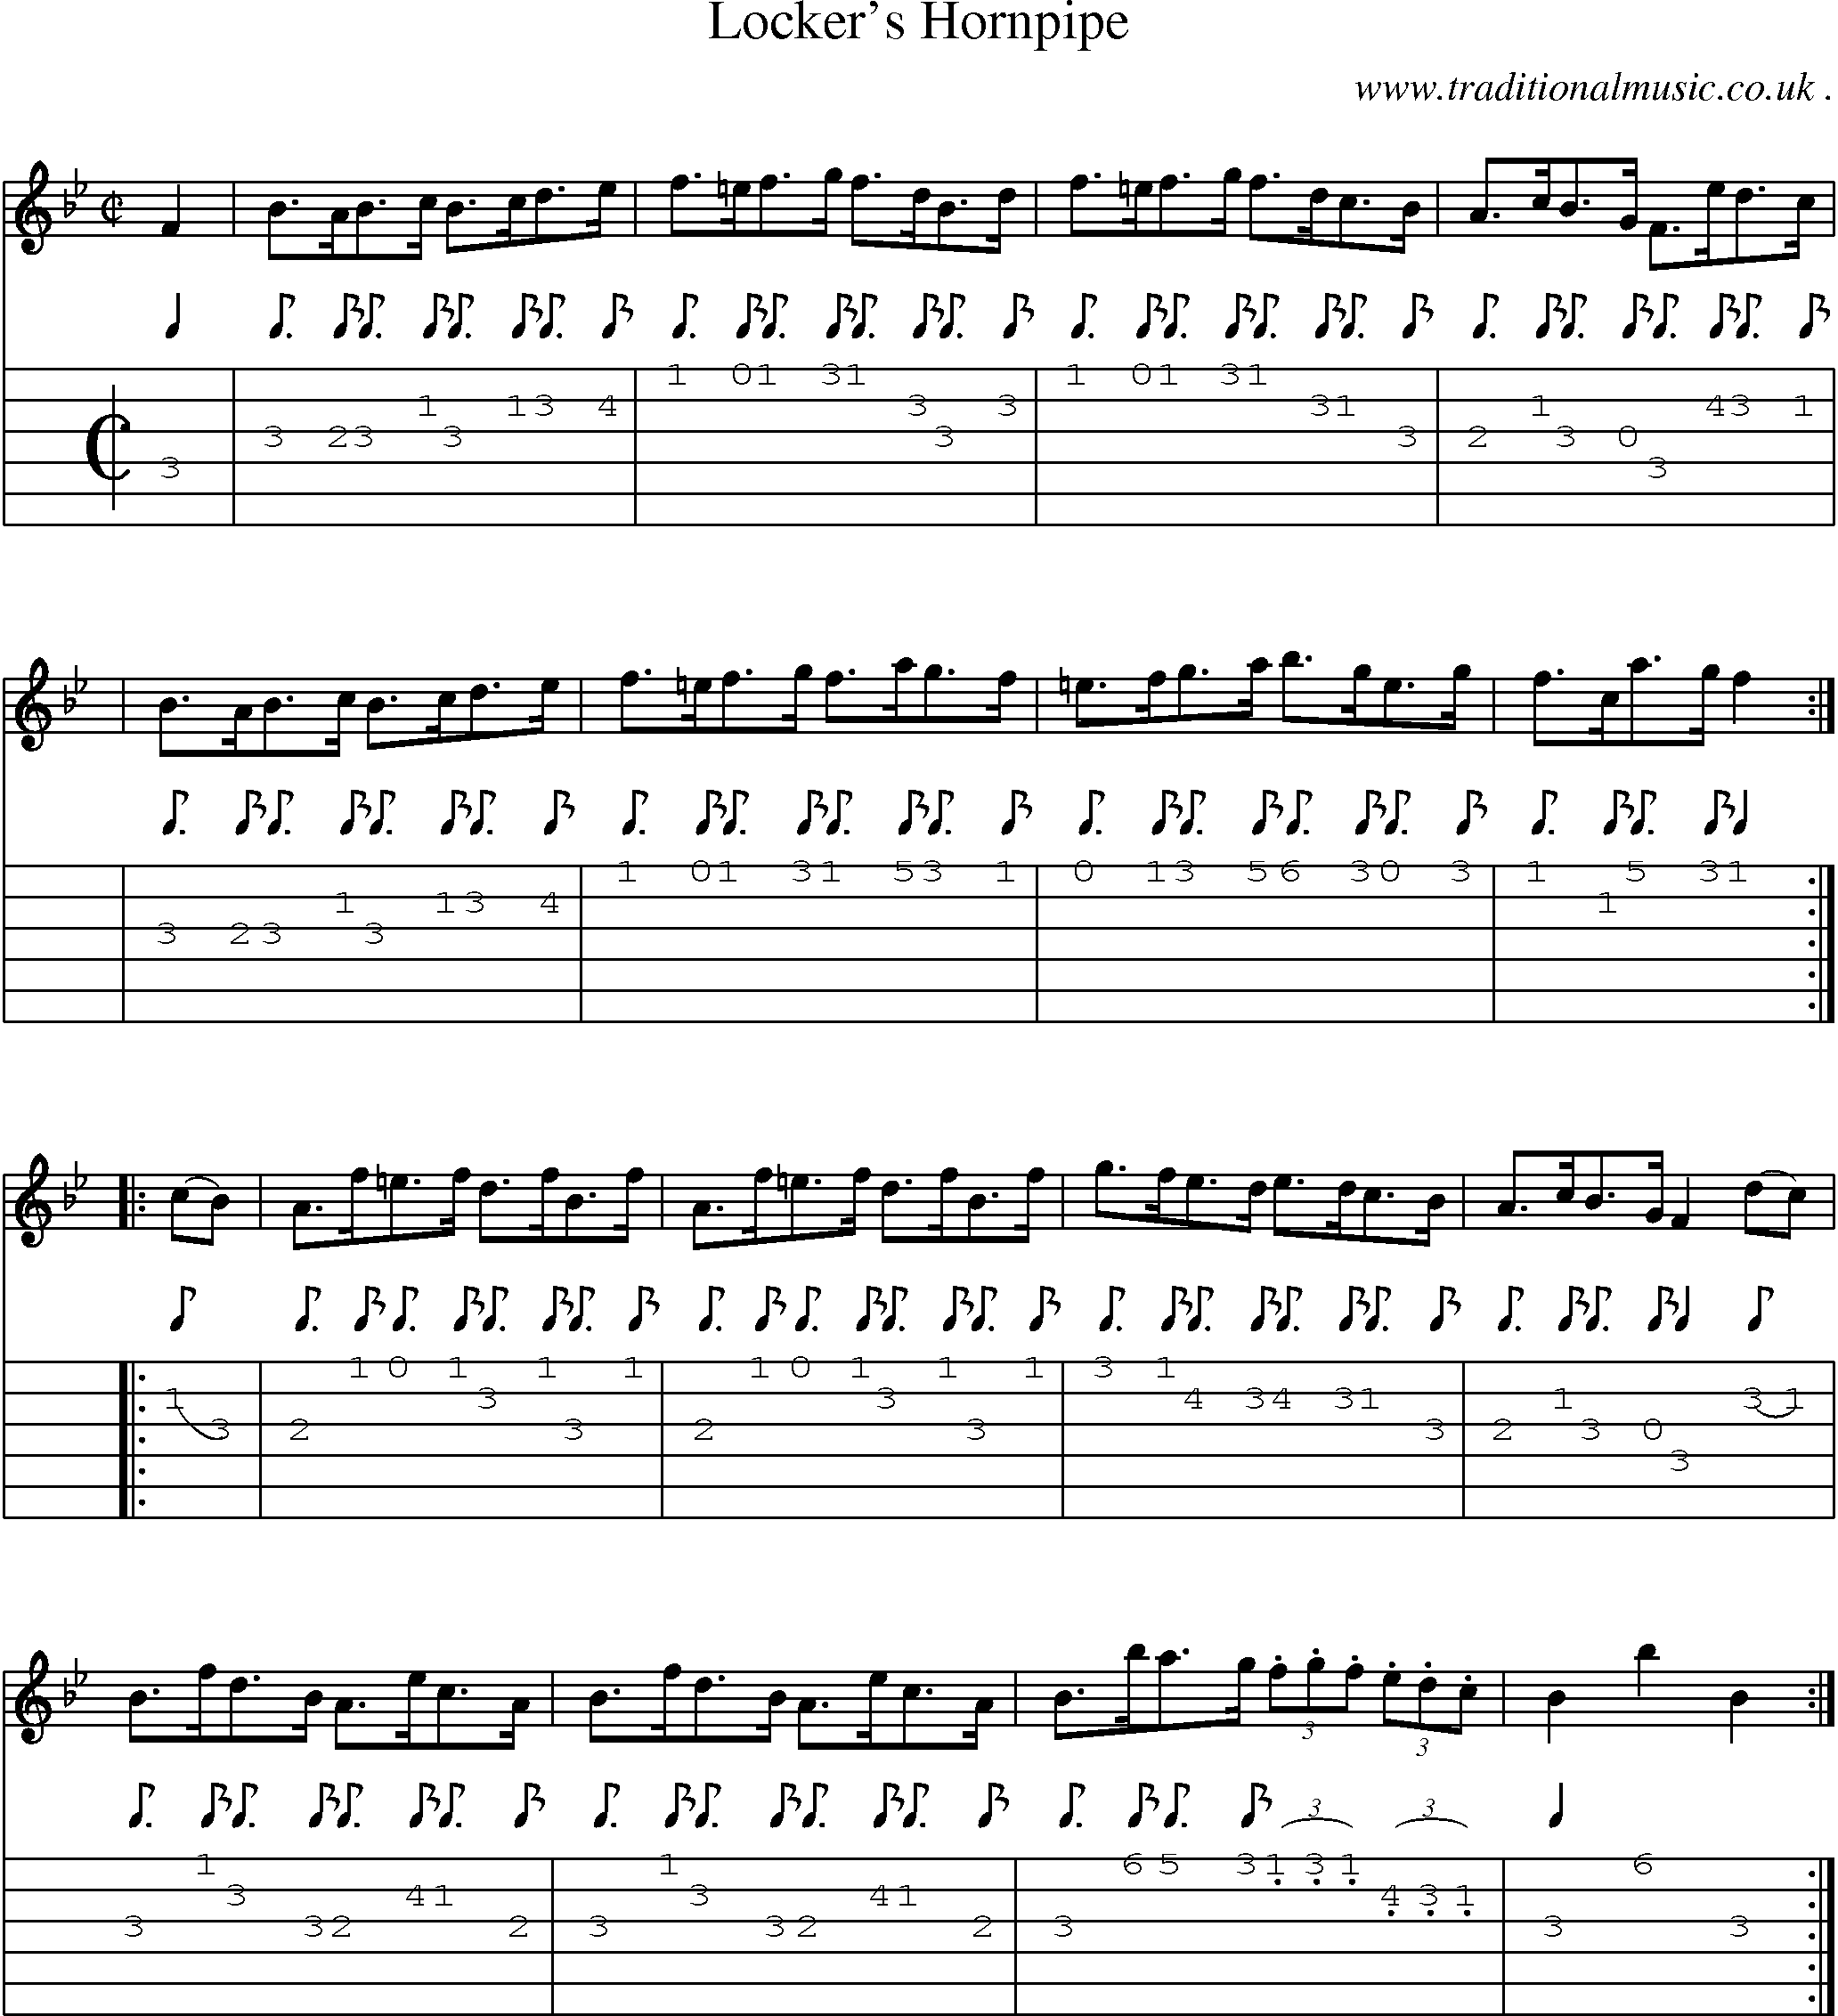 Sheet-Music and Guitar Tabs for Lockers Hornpipe